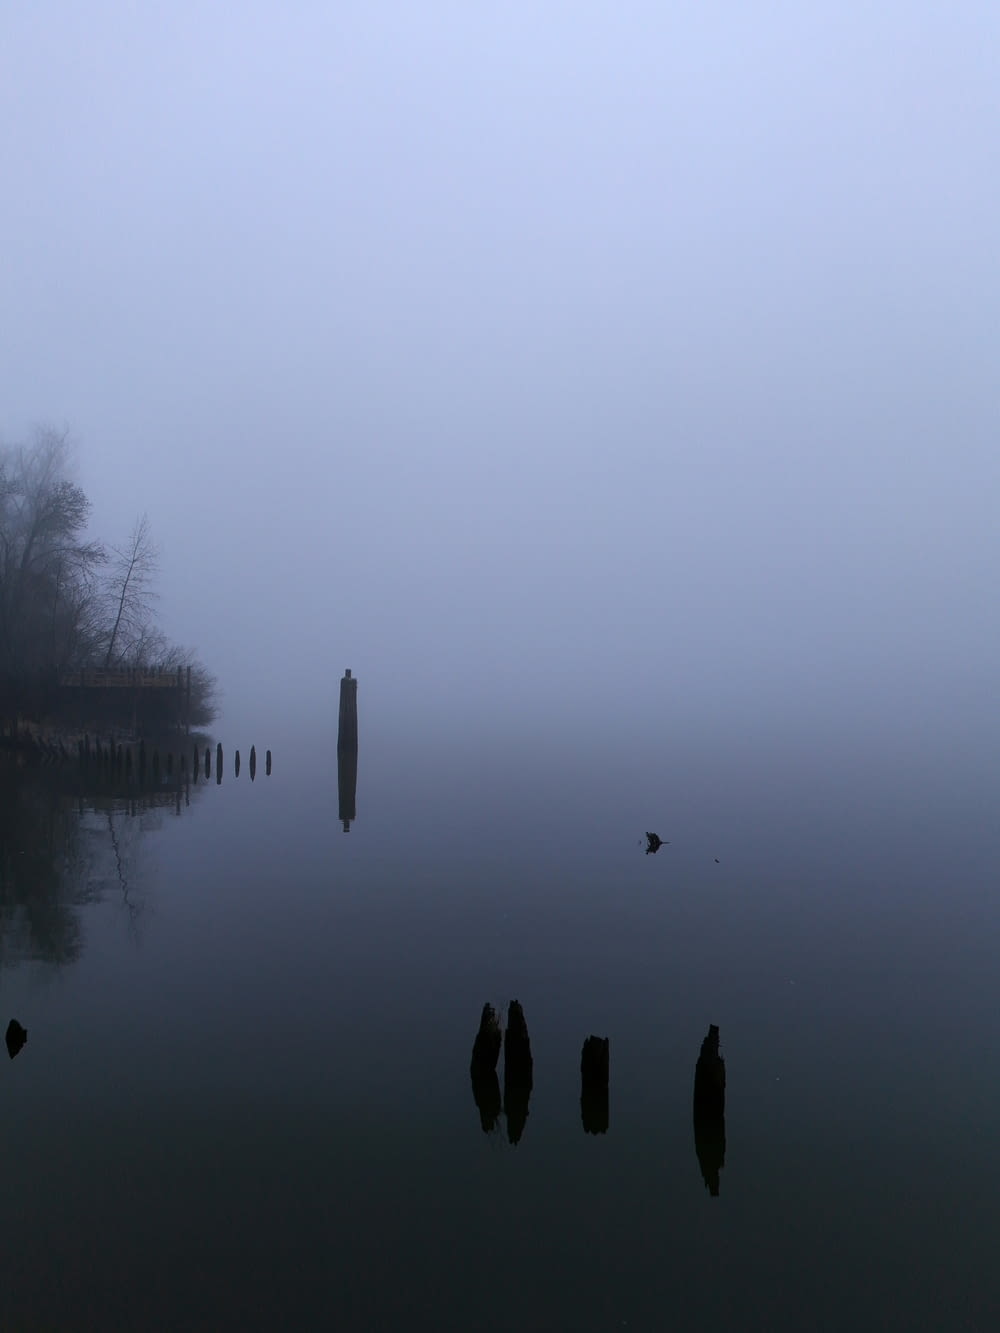 a body of water surrounded by trees and fog